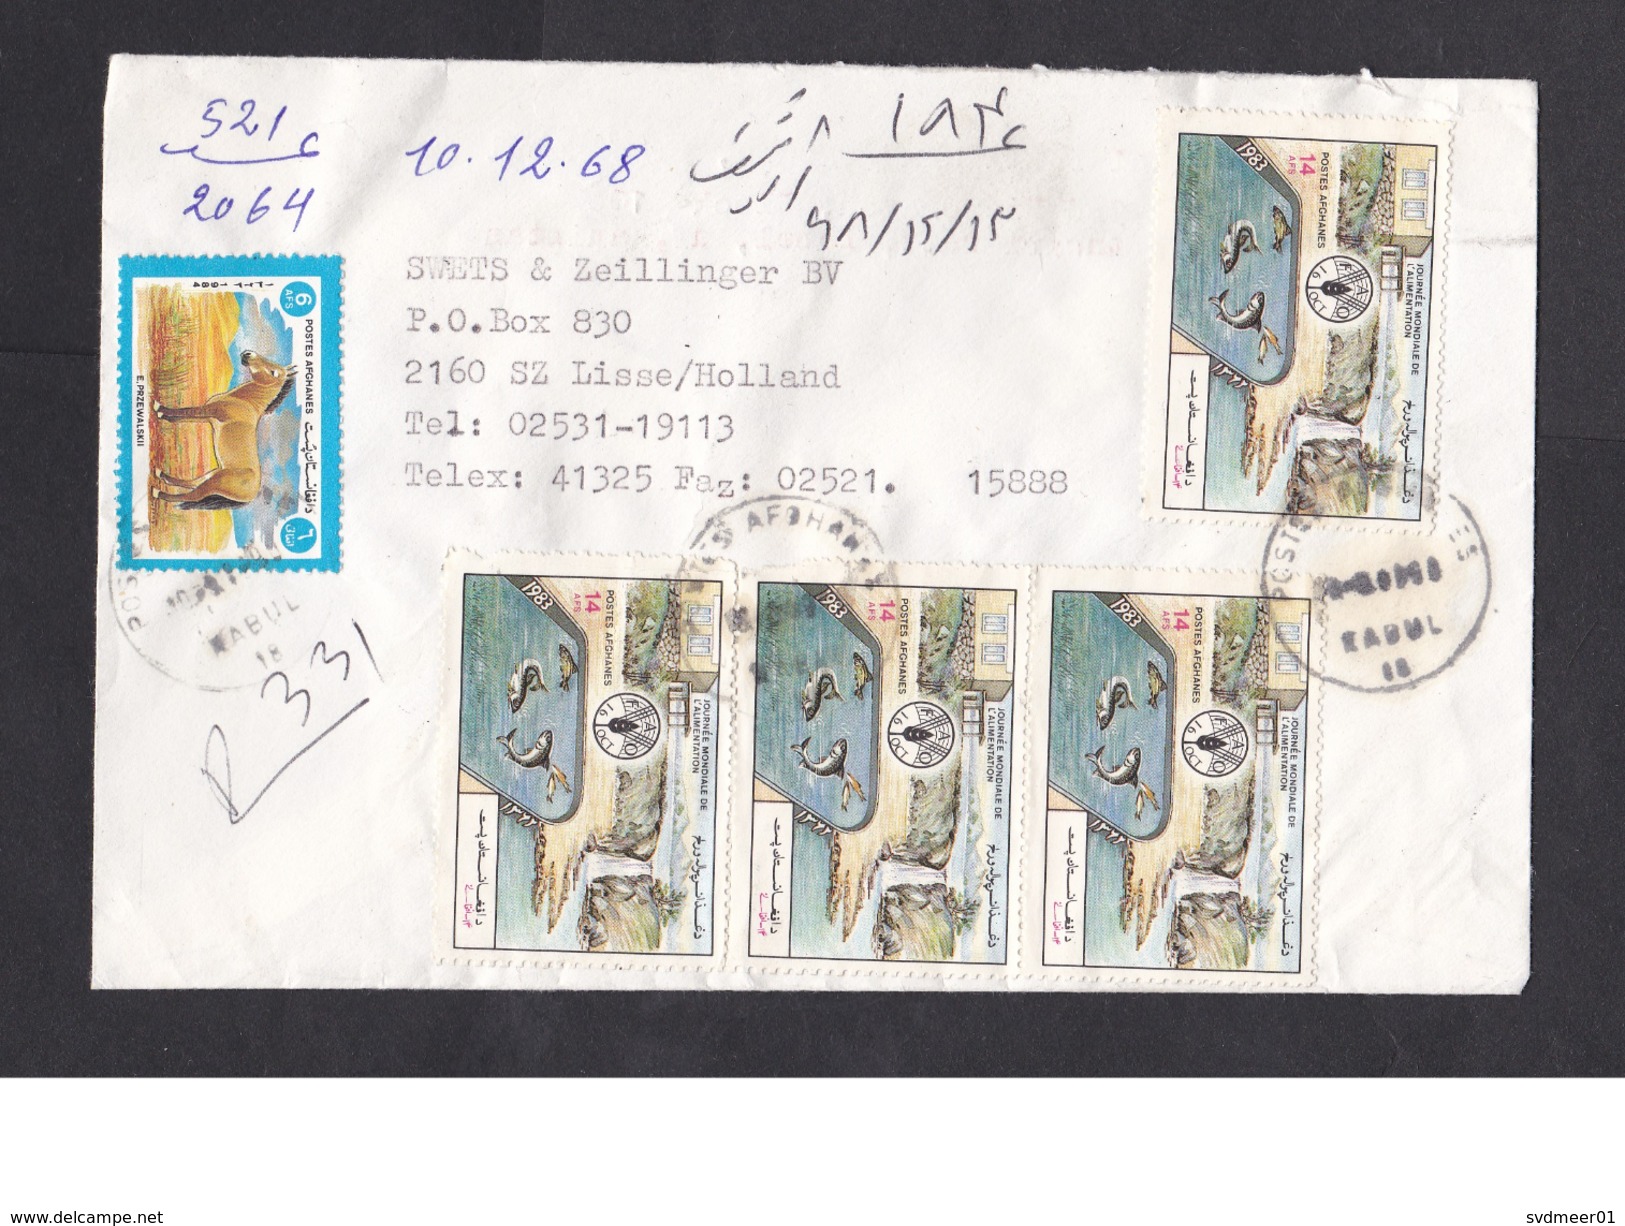 Afghanistan: Cover, 1980s?, 7 Stamps, Food Day, Fish, FAO, Cow, Przewalski Horse, Rare Real Use! (3 Stamps Damaged) - Afghanistan